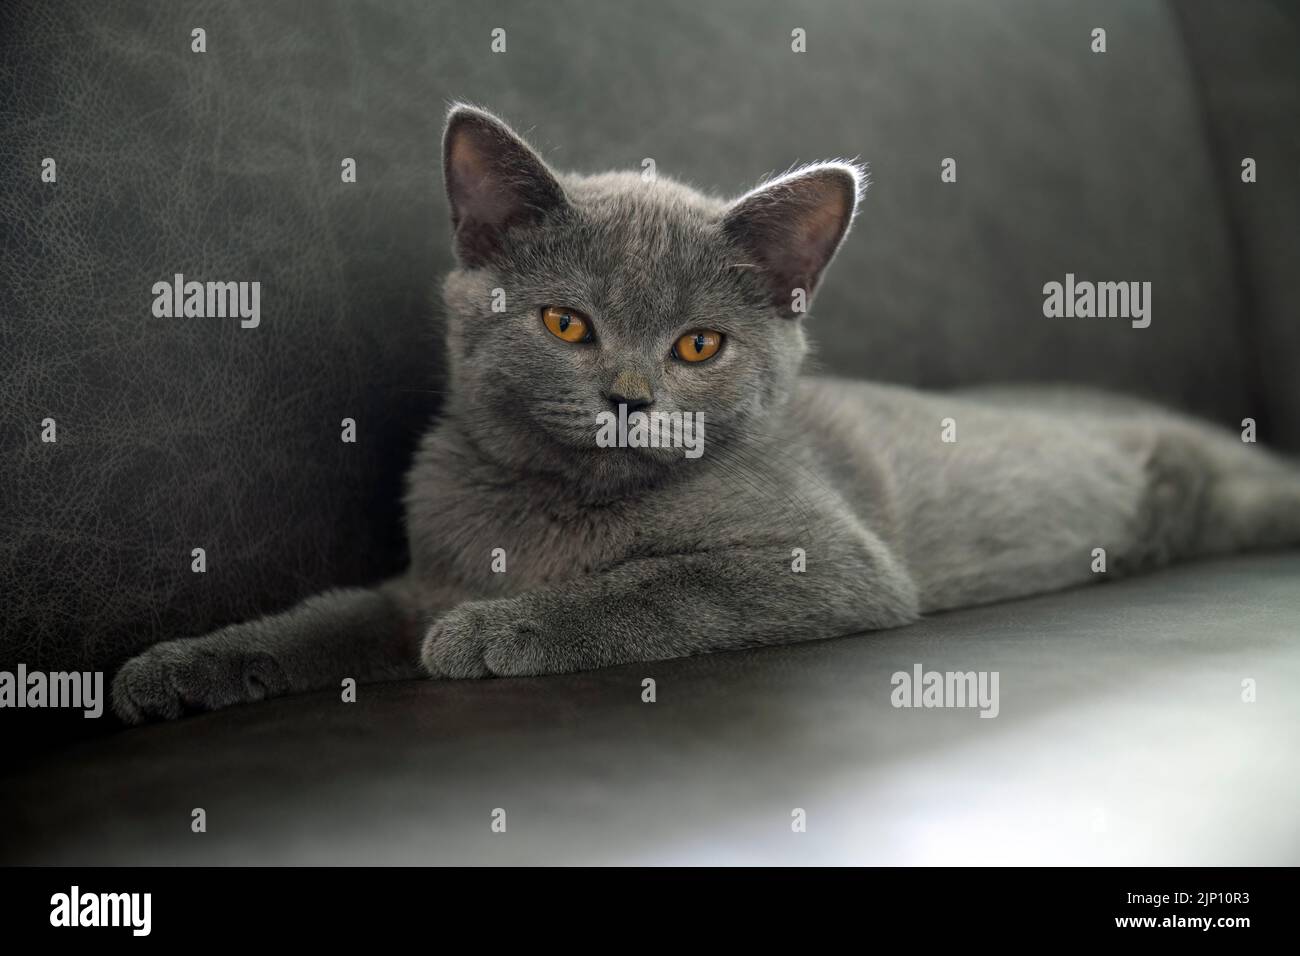 Kitten posing relaxing and looking, British Shorthair cat Blue with sparkling orange eyes sitting comfortably on a black sofa in the house, dark tones Stock Photo